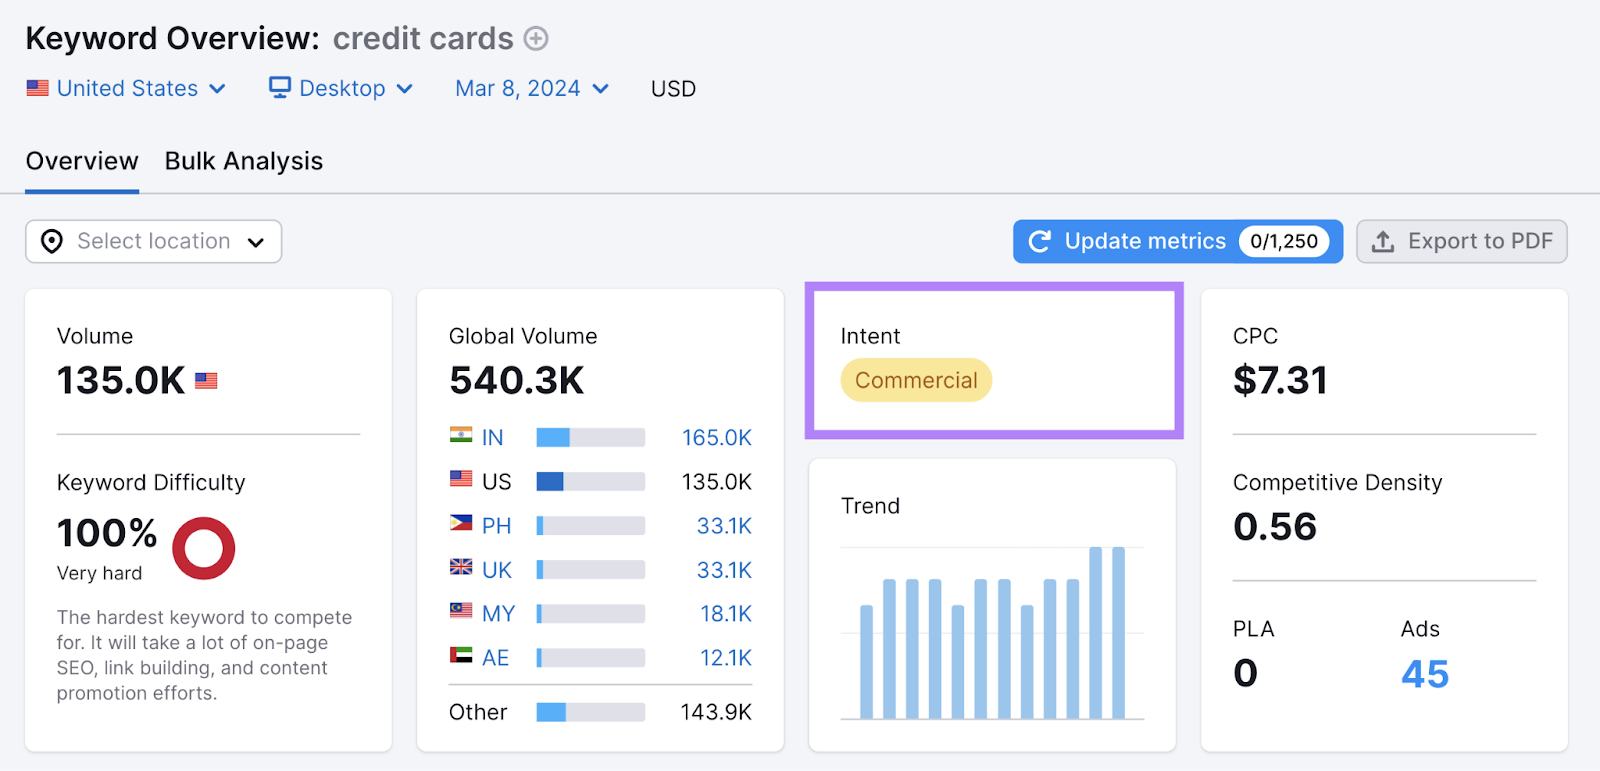 Intent metric for "credit cards" shown in Keyword Overview